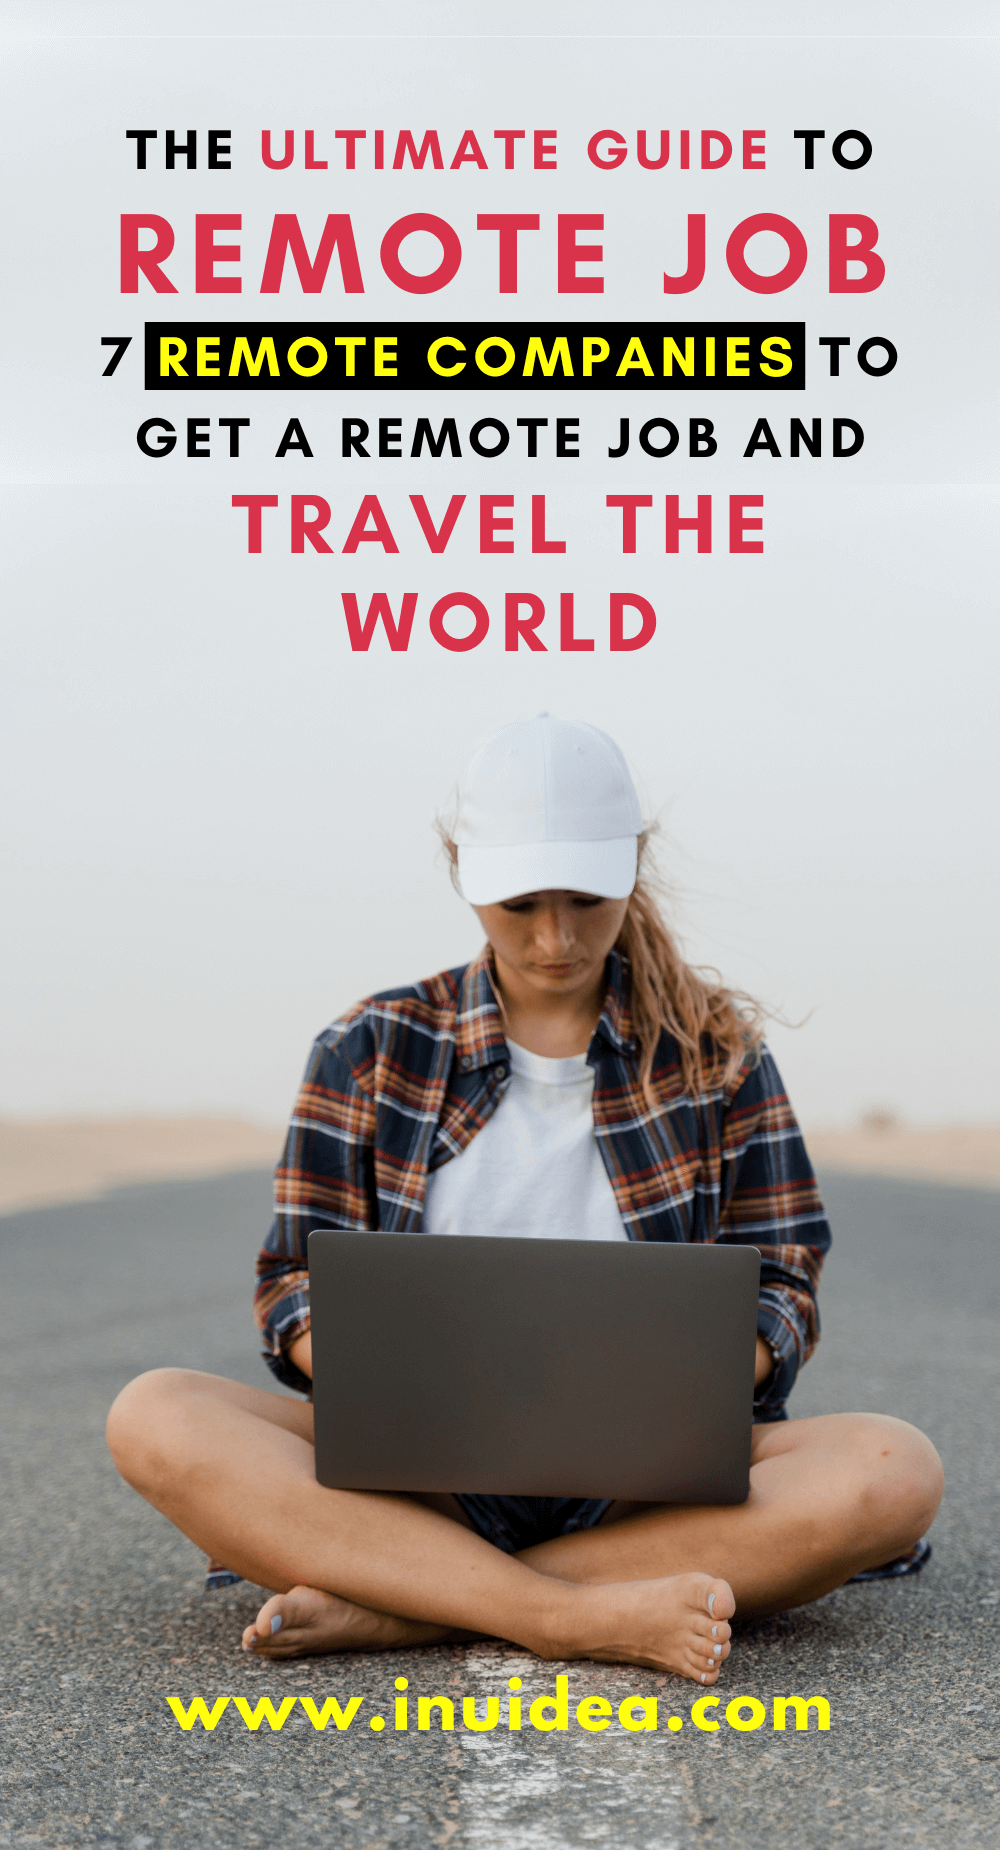 The Ultimate Guide to Remote Job - 7 Remote Companies to Get a Remote Job and Travel the World